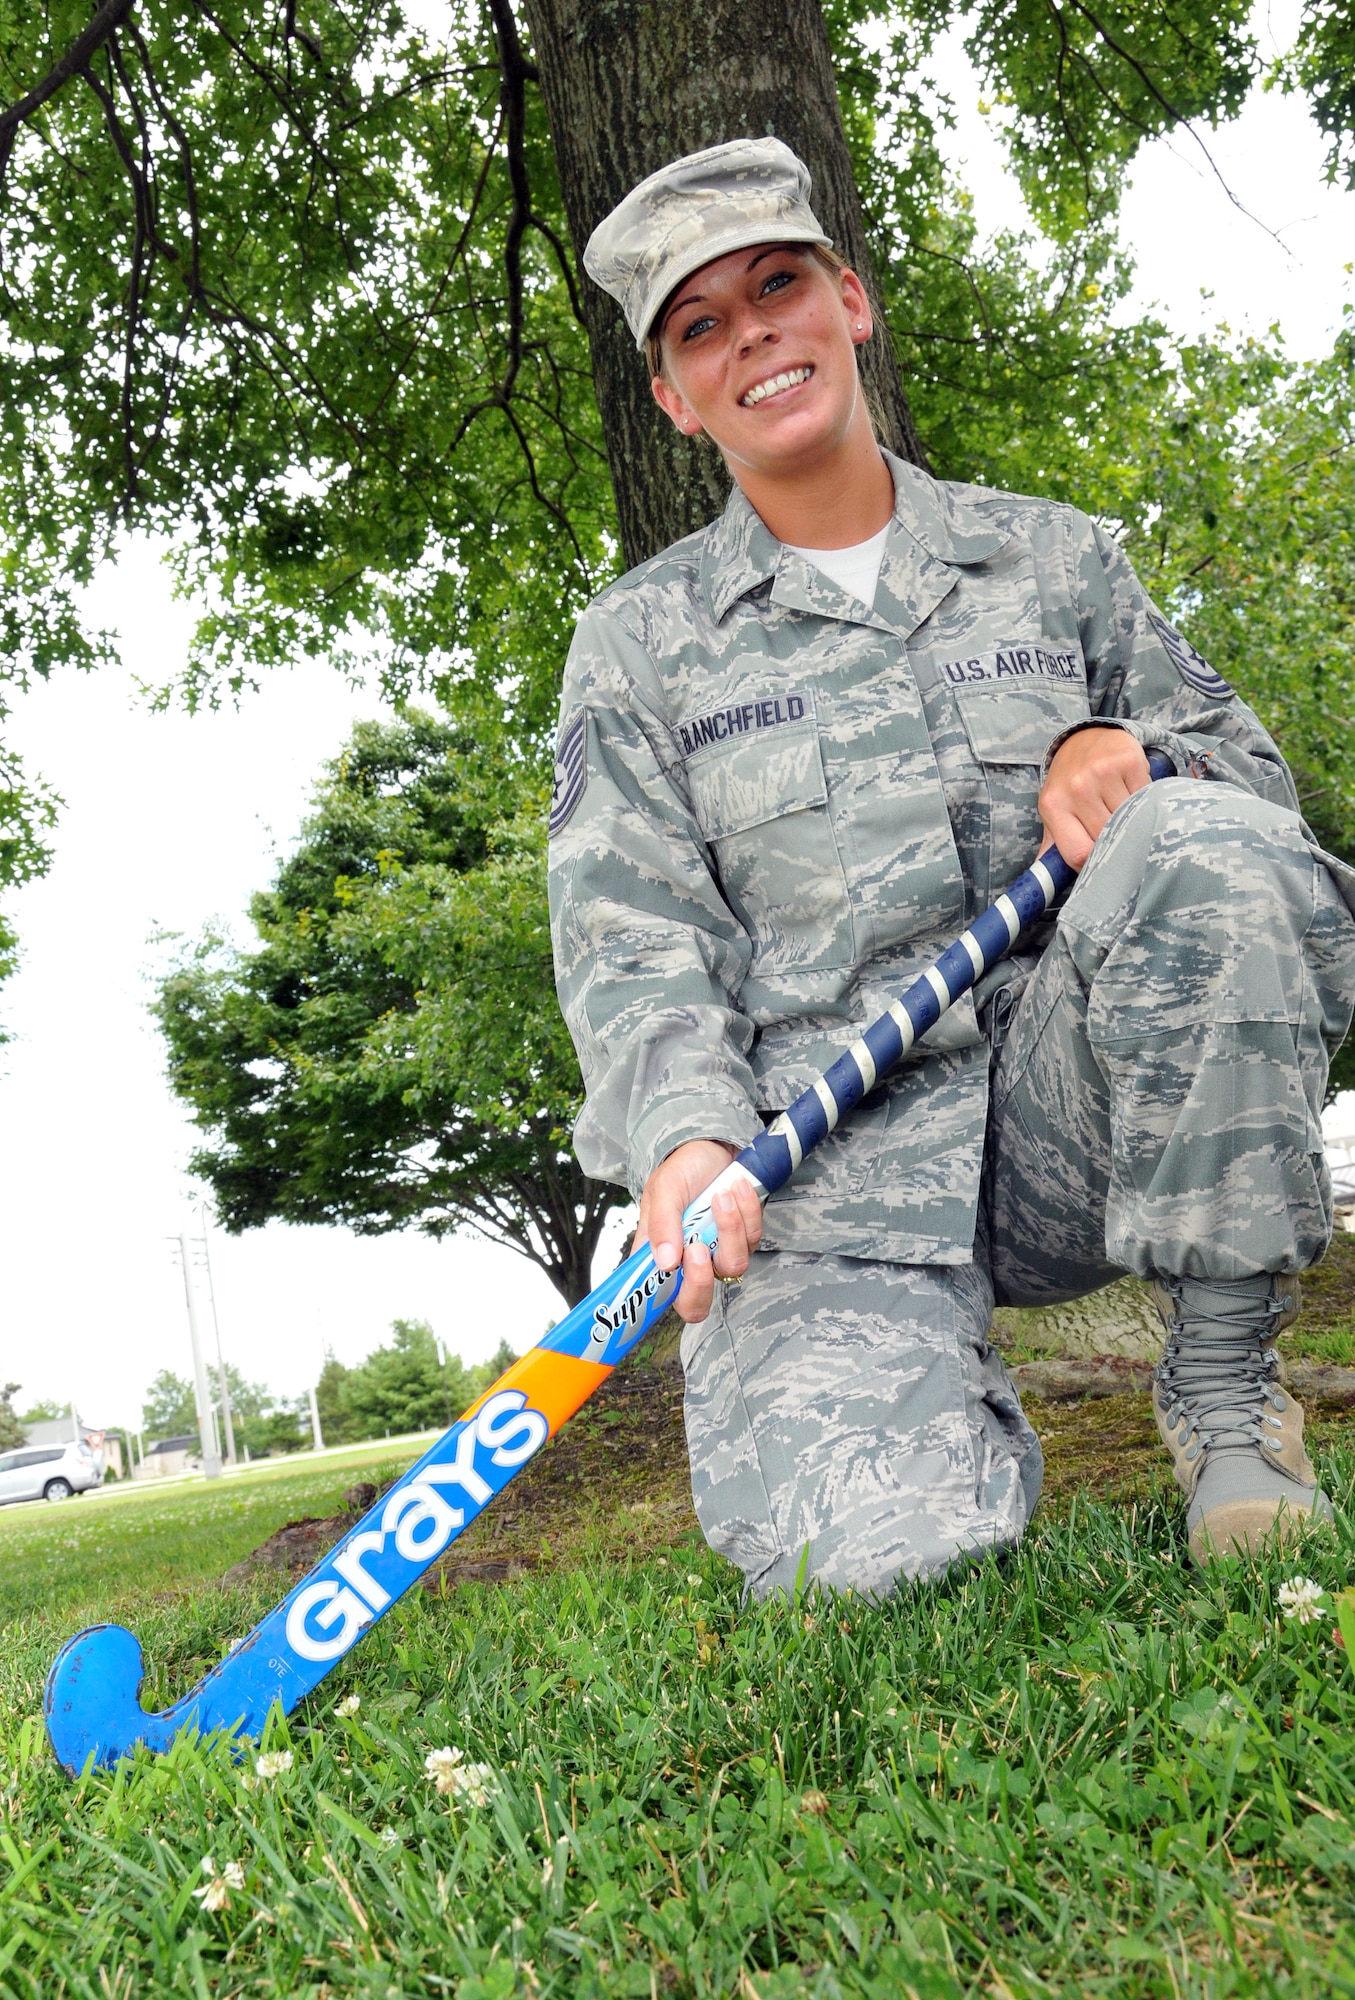 Tech. Sgt. Kate Blanchfield, 512th Airlift Wing commander support staff, poses with her field hockey stick on Dover Air Force Base, Del. July 15, 2012. Blanchfield, a reservist for nearly 10 years, has played competitive field hockey since age 12. (U.S. Air Force photo by Staff Sgt. Andria J. Allmond)